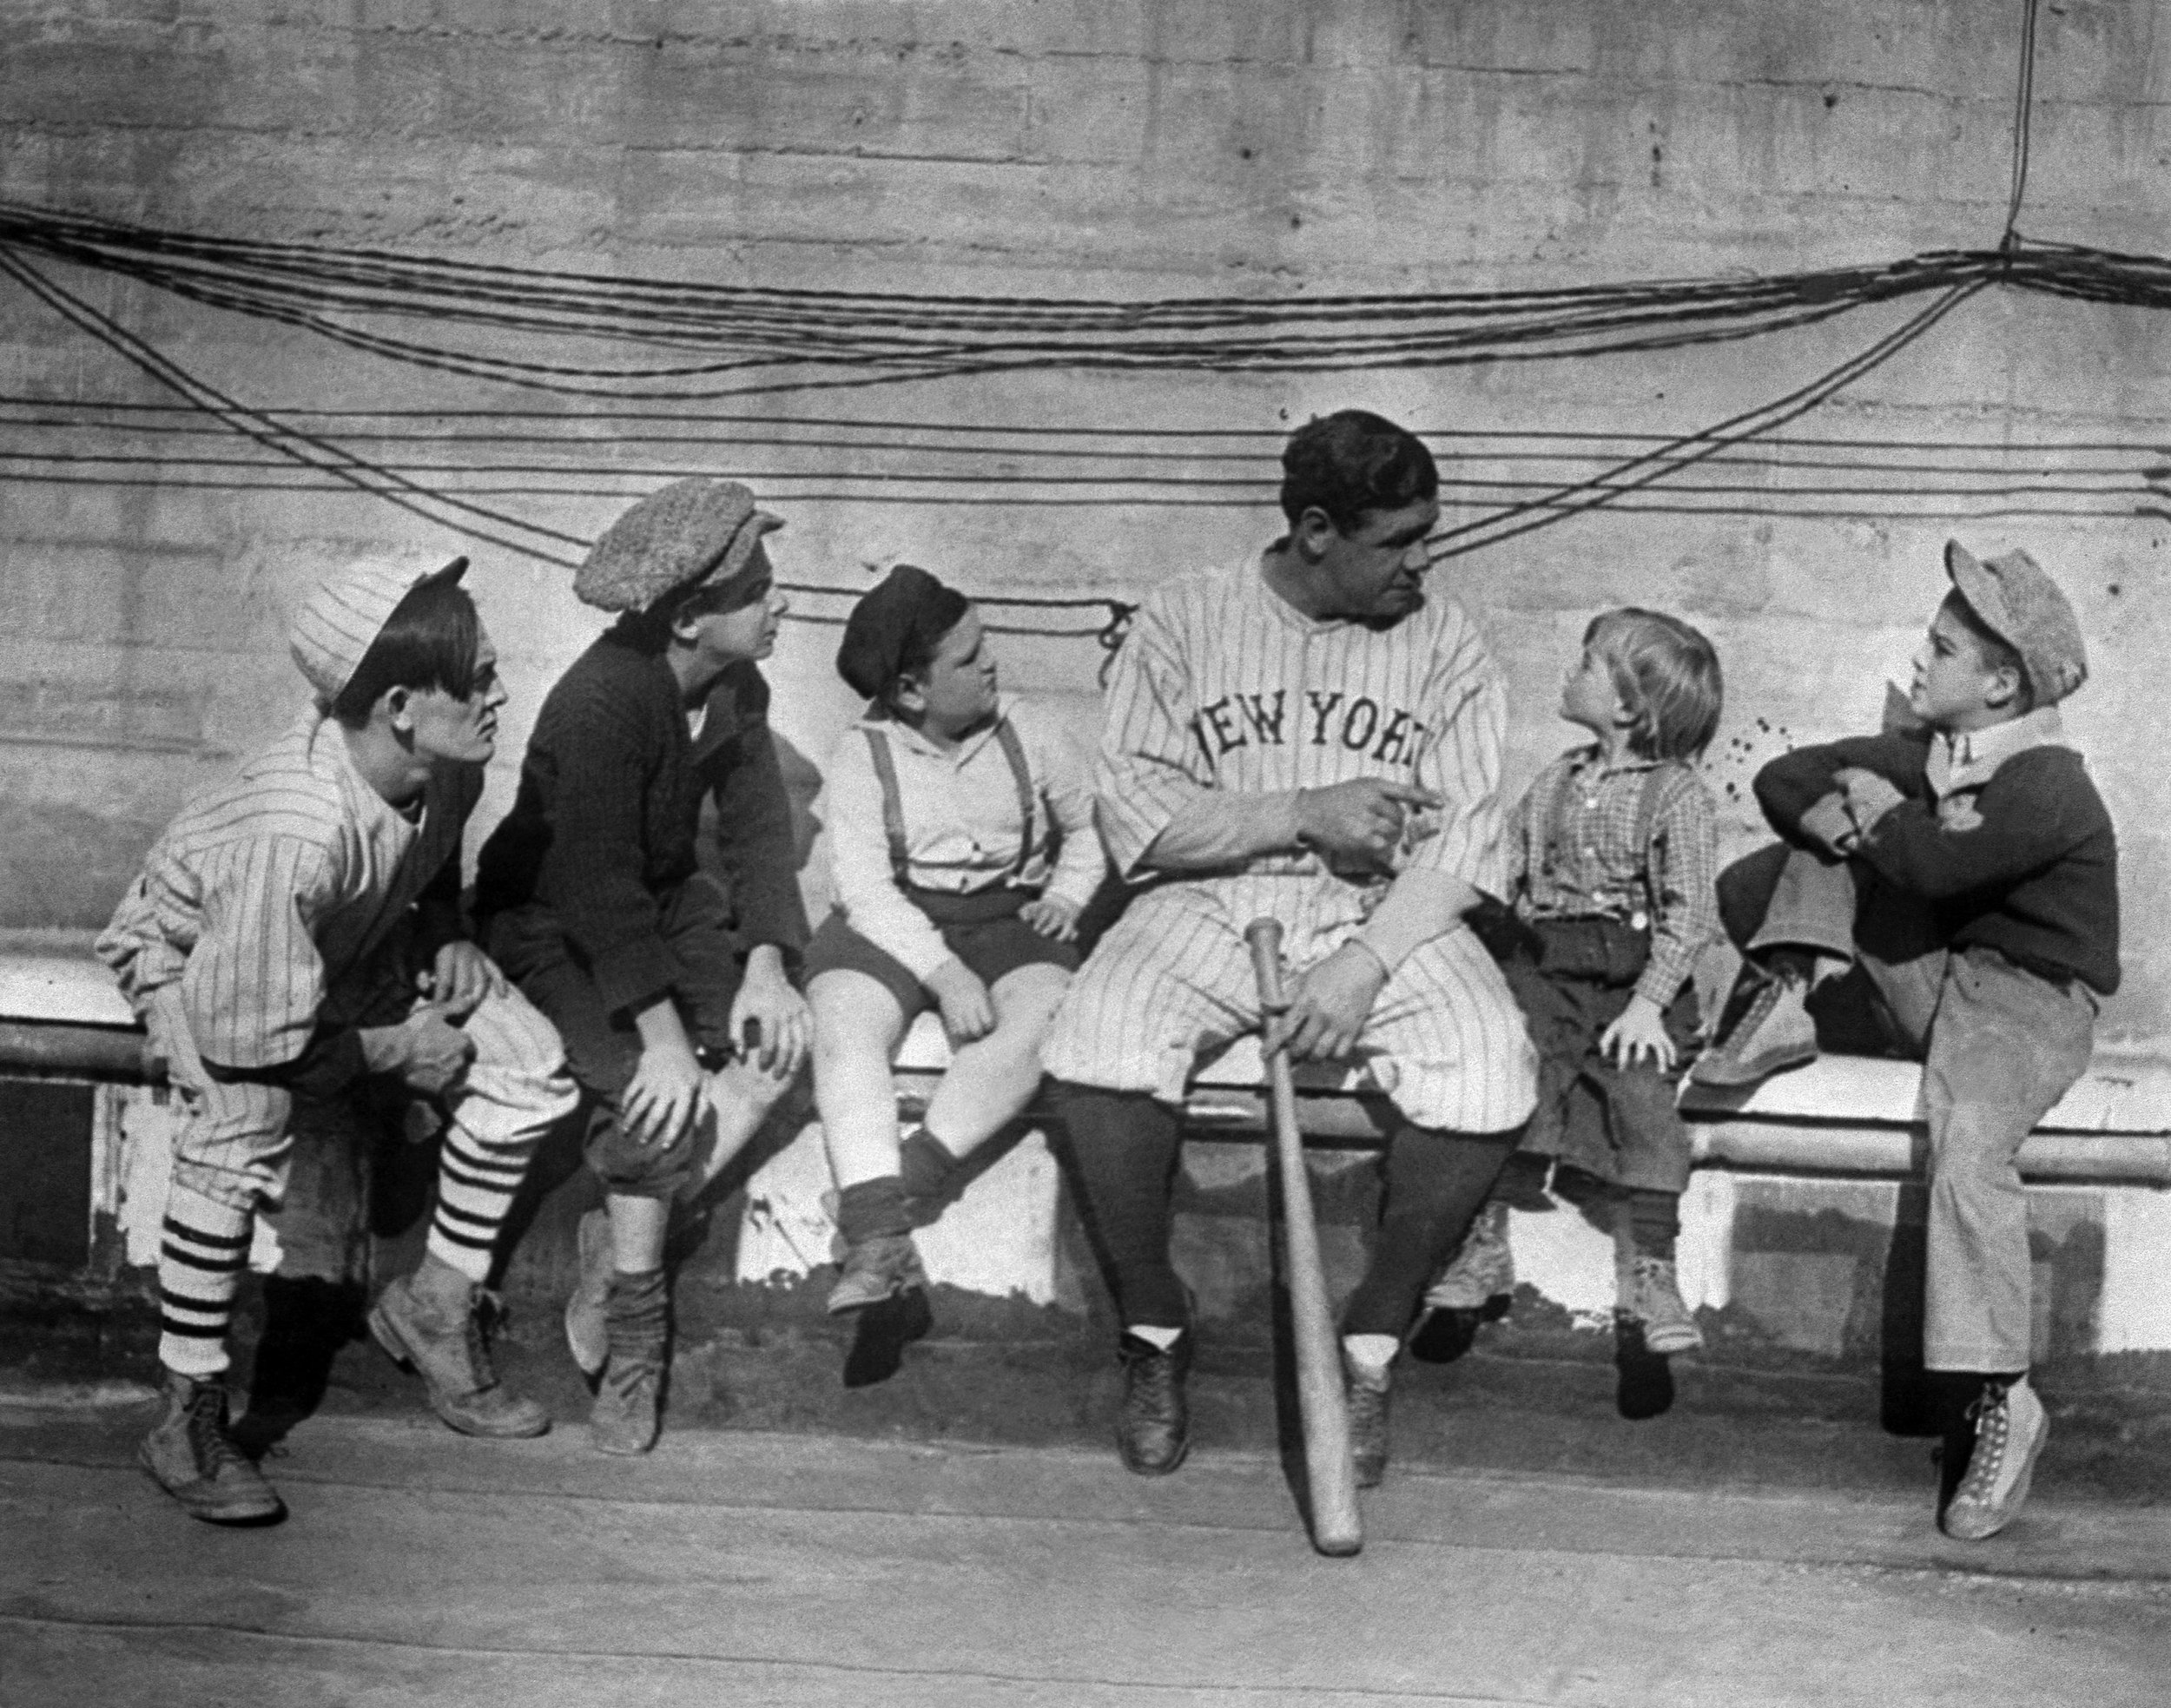  Youngsters lending an ear to Babe Ruth as he tells them stories of his life from orphanage to baseball fame, Nov. 29, 1924. (AP Photo) 